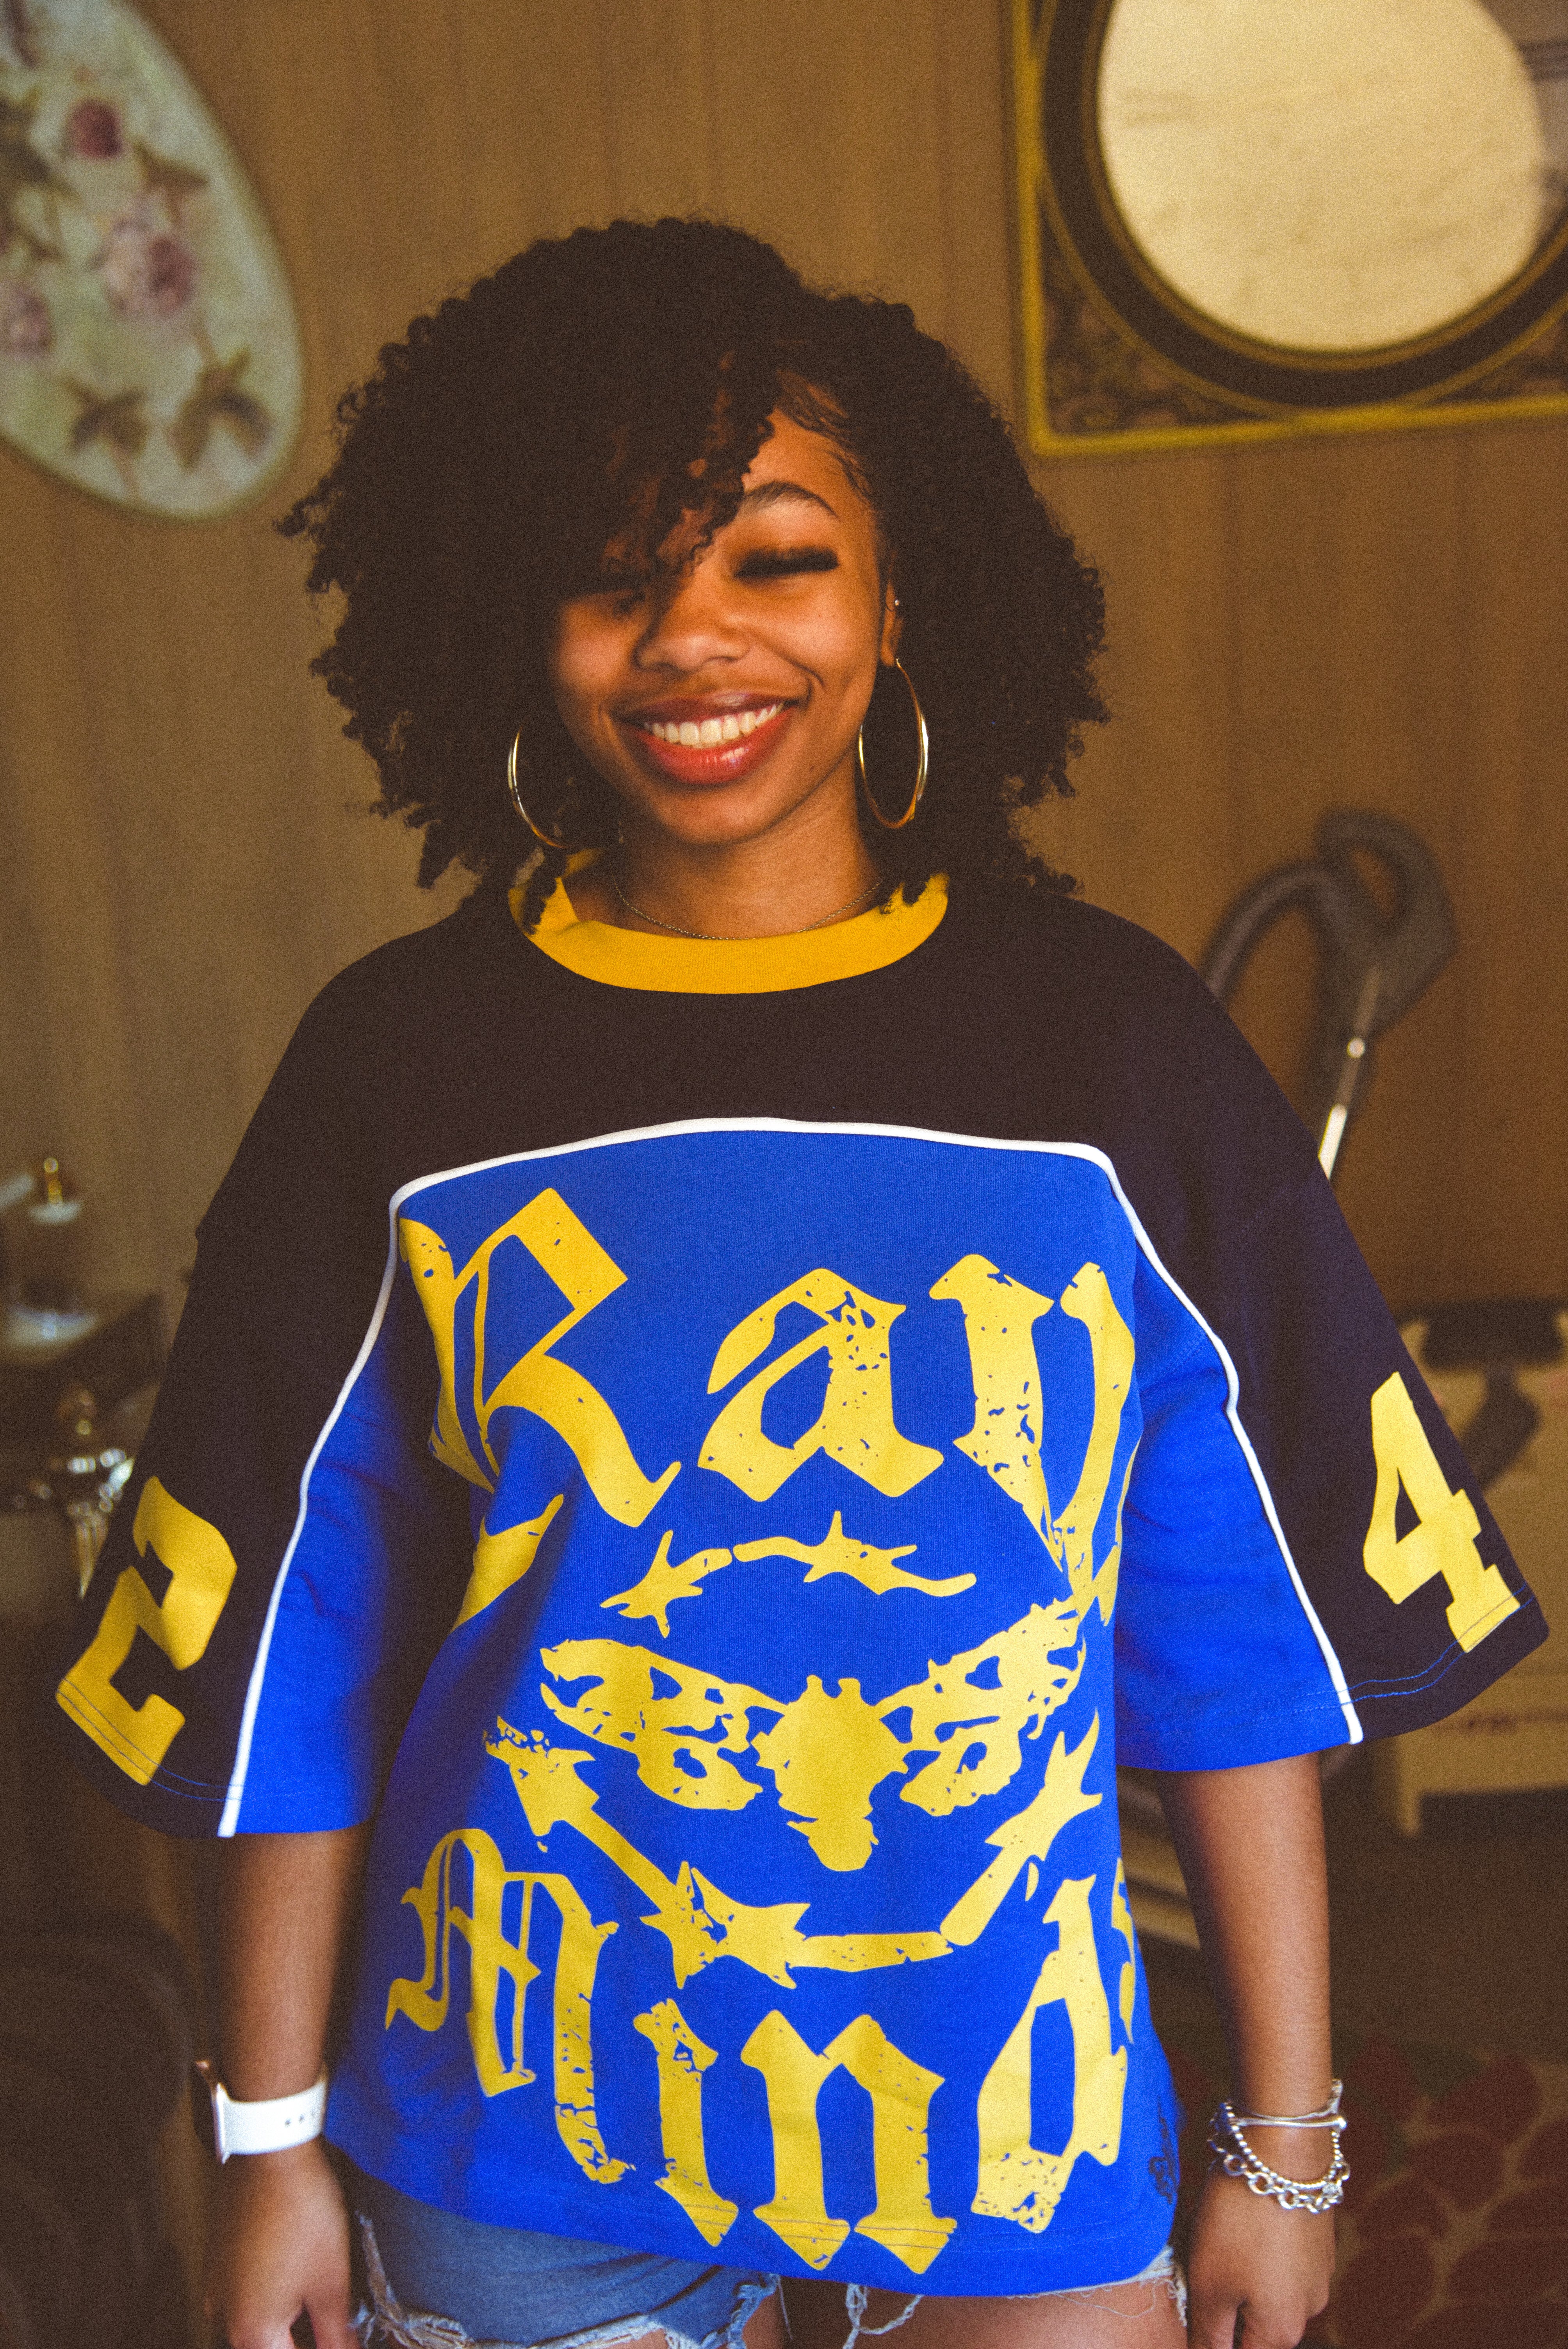 Raw minds oversized Blue and gold jersey